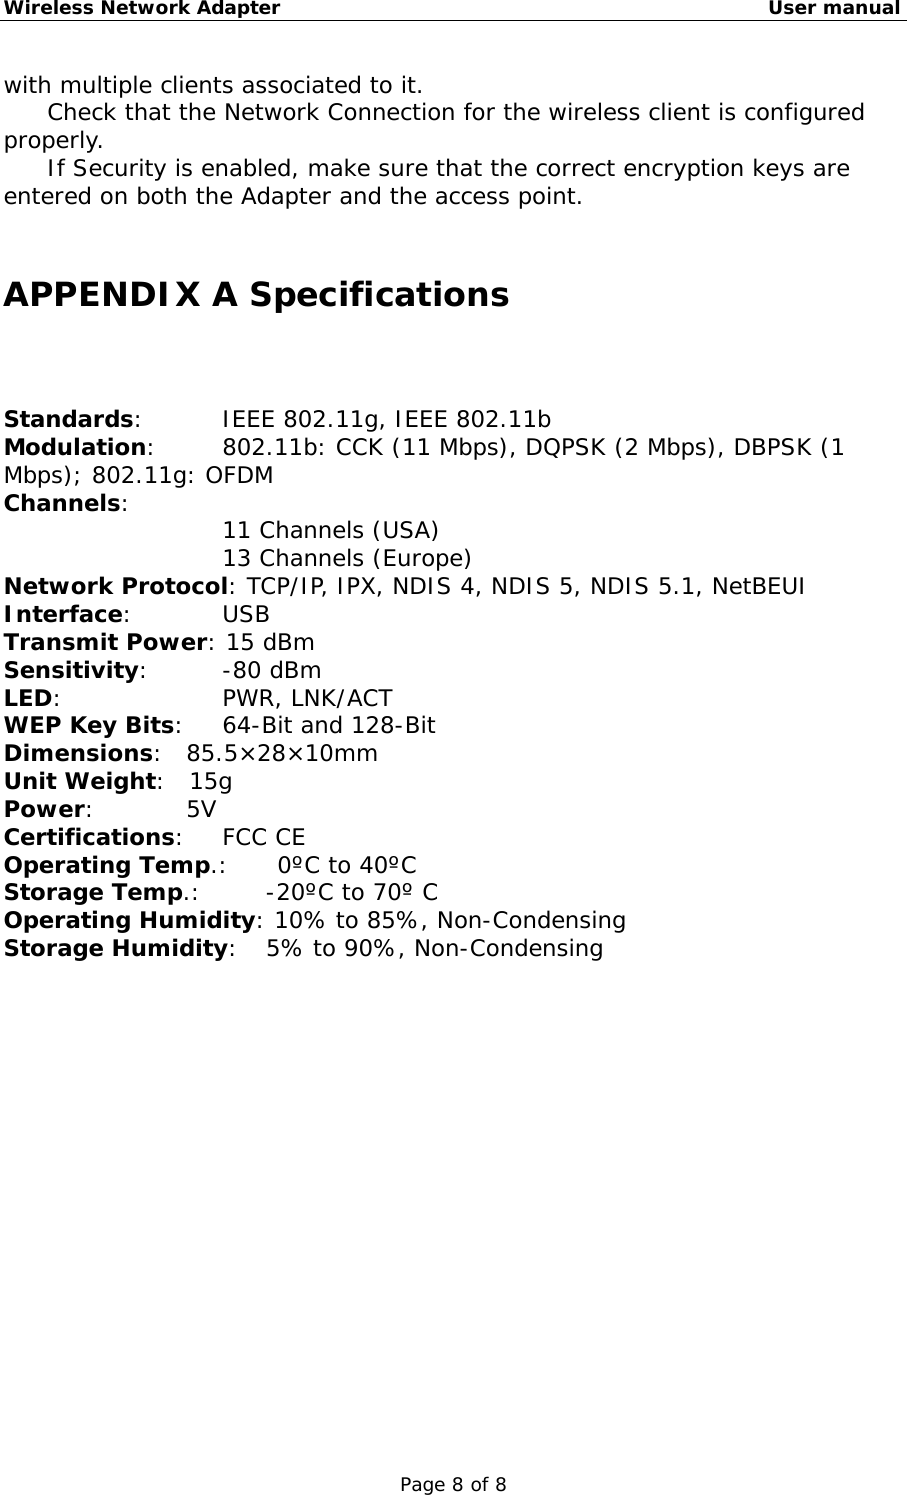 Wireless Network Adapter                                                    User manual Page 8 of 8 with multiple clients associated to it.  　  Check that the Network Connection for the wireless client is configured properly.  　  If Security is enabled, make sure that the correct encryption keys are entered on both the Adapter and the access point.  APPENDIX A Specifications Standards:     IEEE 802.11g, IEEE 802.11b Modulation:    802.11b: CCK (11 Mbps), DQPSK (2 Mbps), DBPSK (1 Mbps); 802.11g: OFDM Channels:  11 Channels (USA) 13 Channels (Europe) Network Protocol: TCP/IP, IPX, NDIS 4, NDIS 5, NDIS 5.1, NetBEUI Interface:      USB Transmit Power: 15 dBm Sensitivity:   -80 dBm LED:     PWR, LNK/ACT WEP Key Bits:   64-Bit and 128-Bit Dimensions:  85.5×28×10mm Unit Weight:  15g Power:        5V Certifications:   FCC CE Operating Temp.:   0ºC to 40ºC Storage Temp.:    -20ºC to 70º C Operating Humidity: 10% to 85%, Non-Condensing Storage Humidity:   5% to 90%, Non-Condensing 